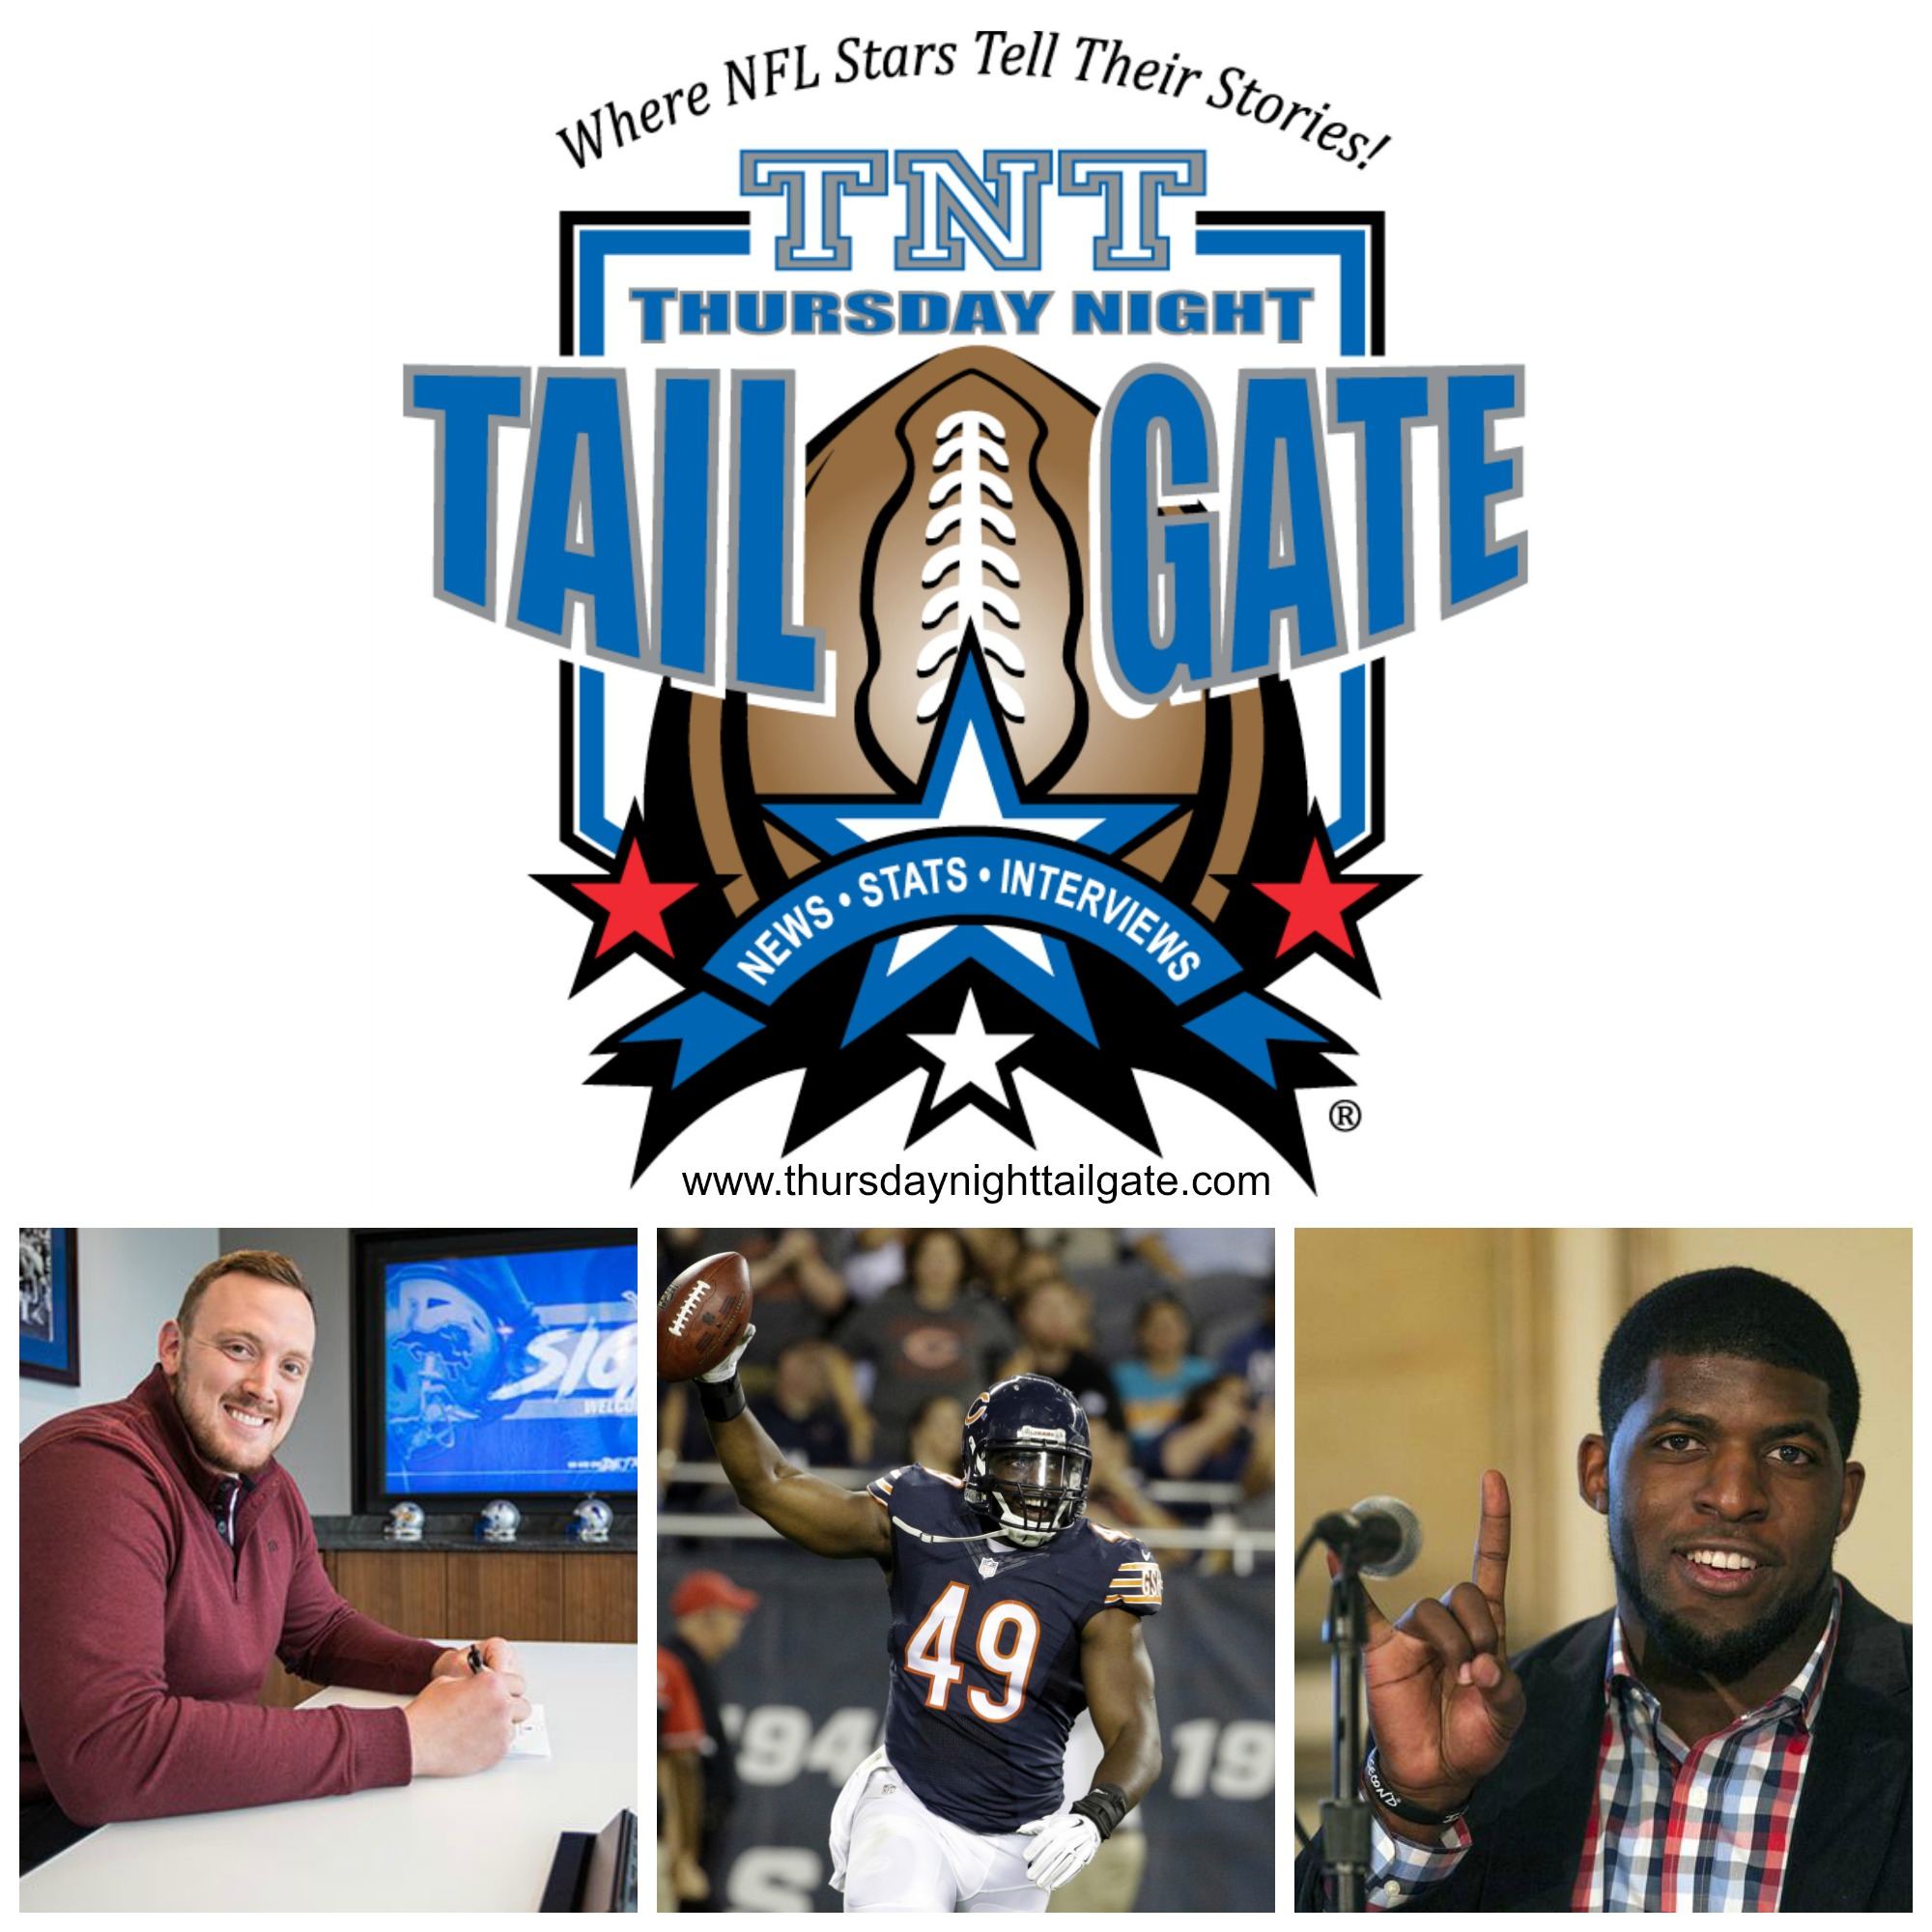 Thursday Night Tailgate NFL Podcast Spotlight on the Positive: Lions Guard Kenny Wiggins + Former Eagles LB Emmanuel Acho & his brother Bears LB Sam Acho